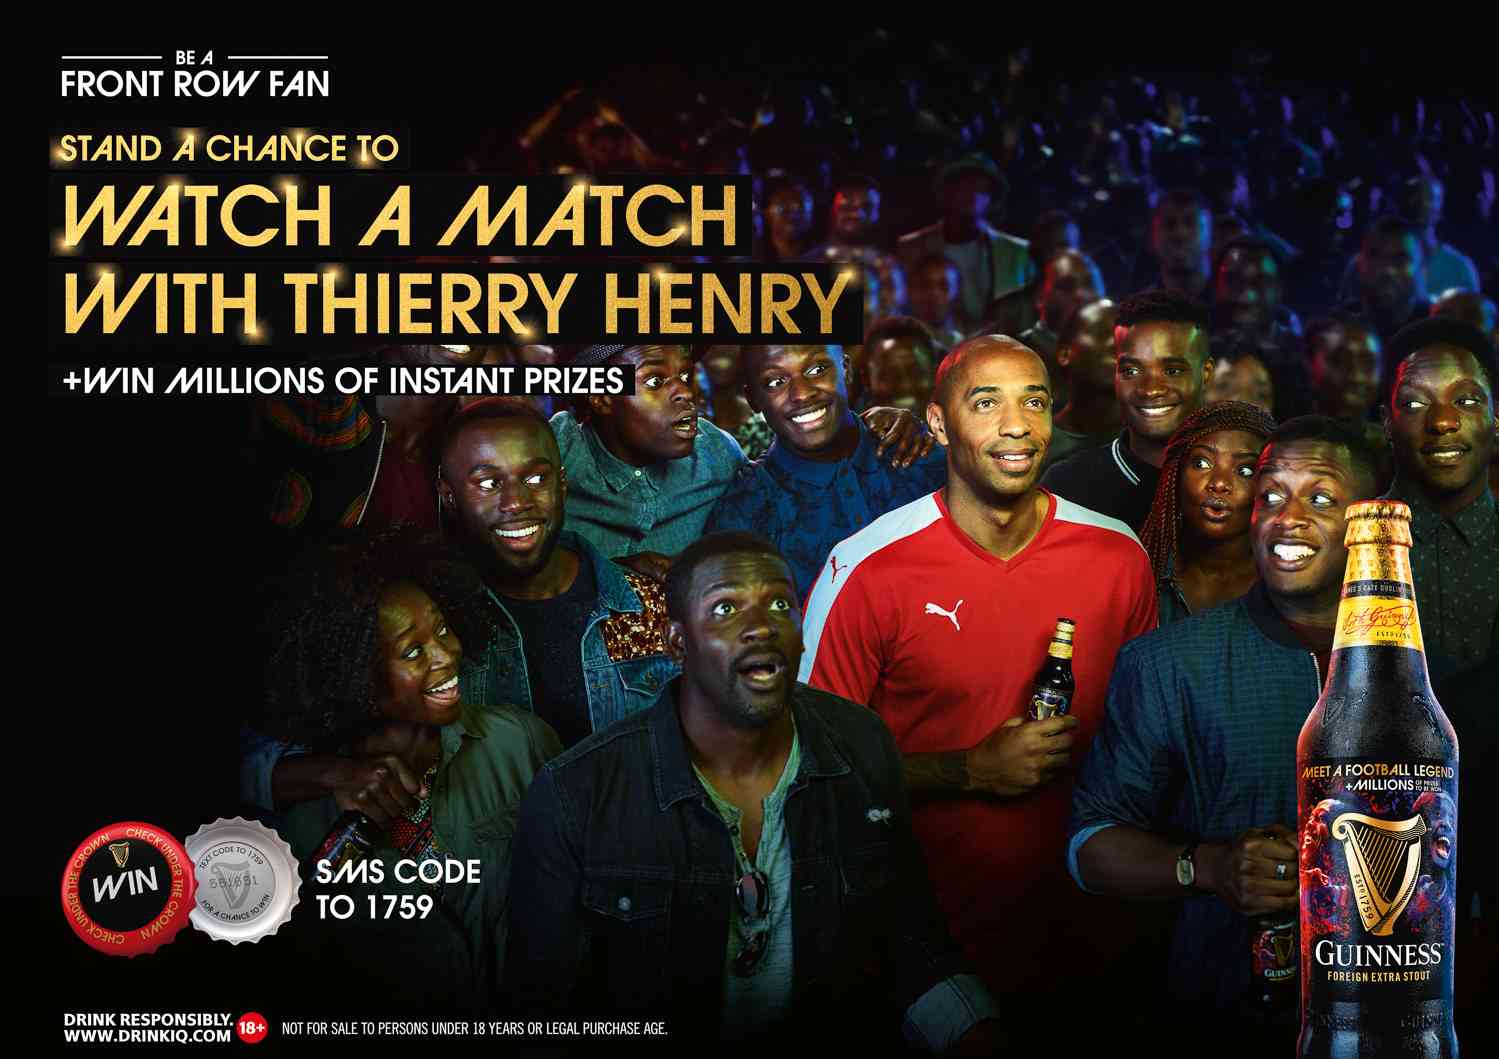 thierry henry in Guiness photo by saint